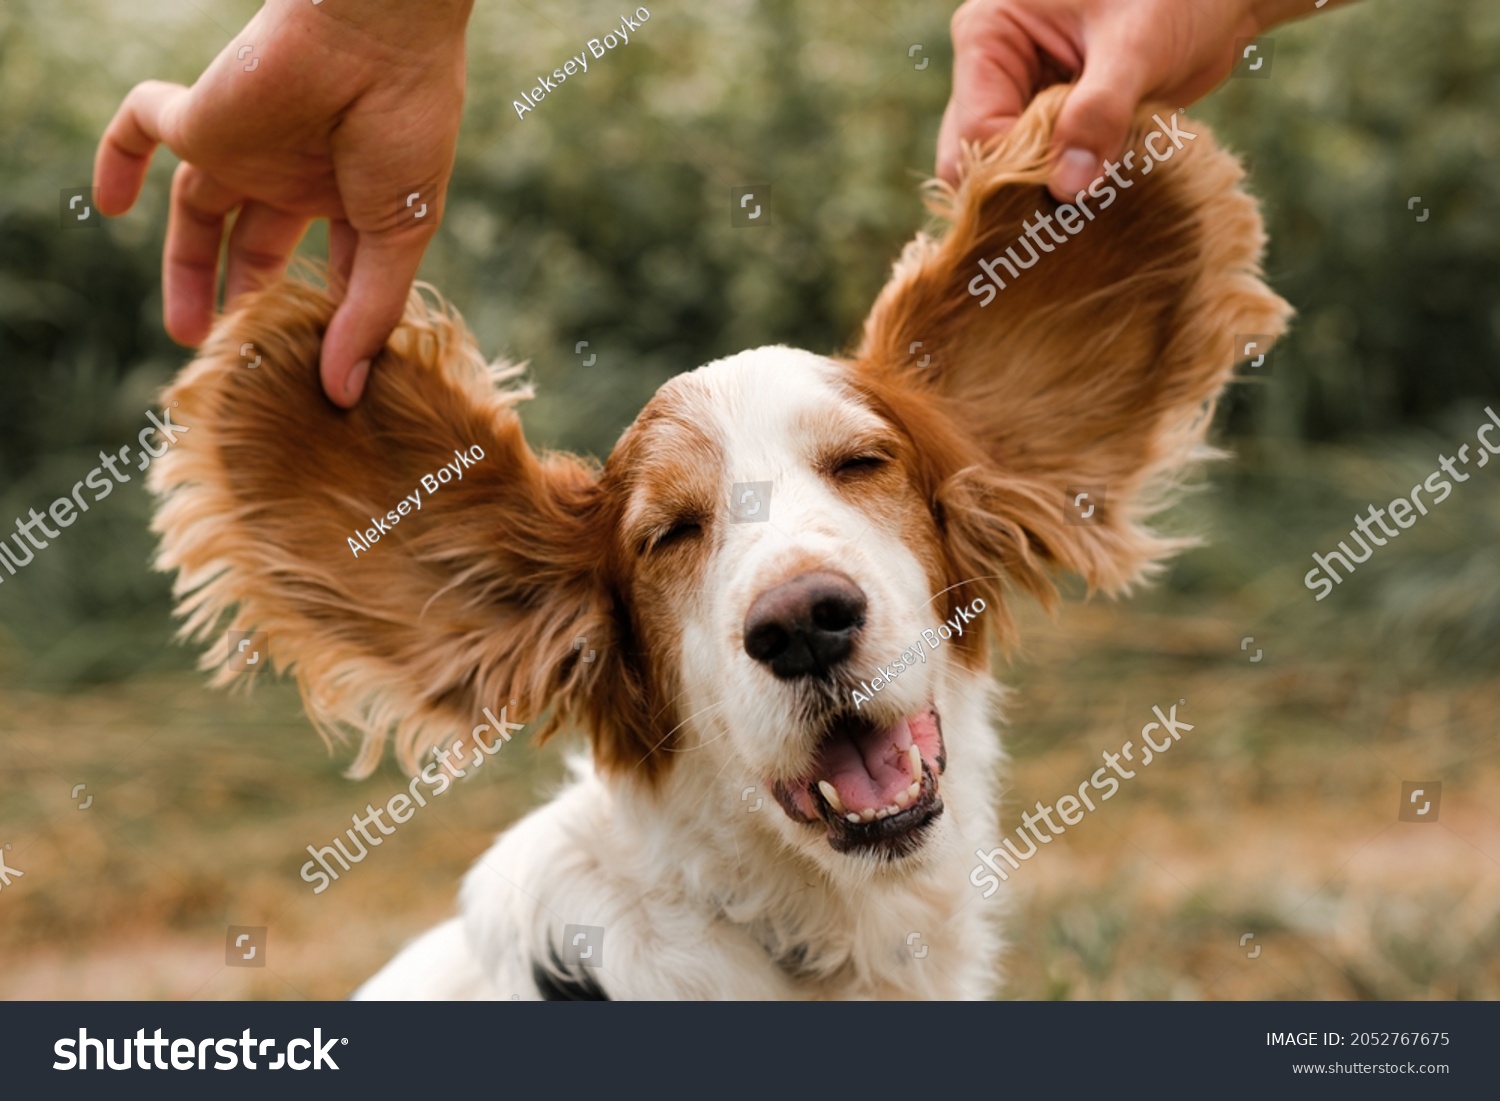 Portrait of a spaniel dog with large funny floppy ears, outdoors scene #2052767675